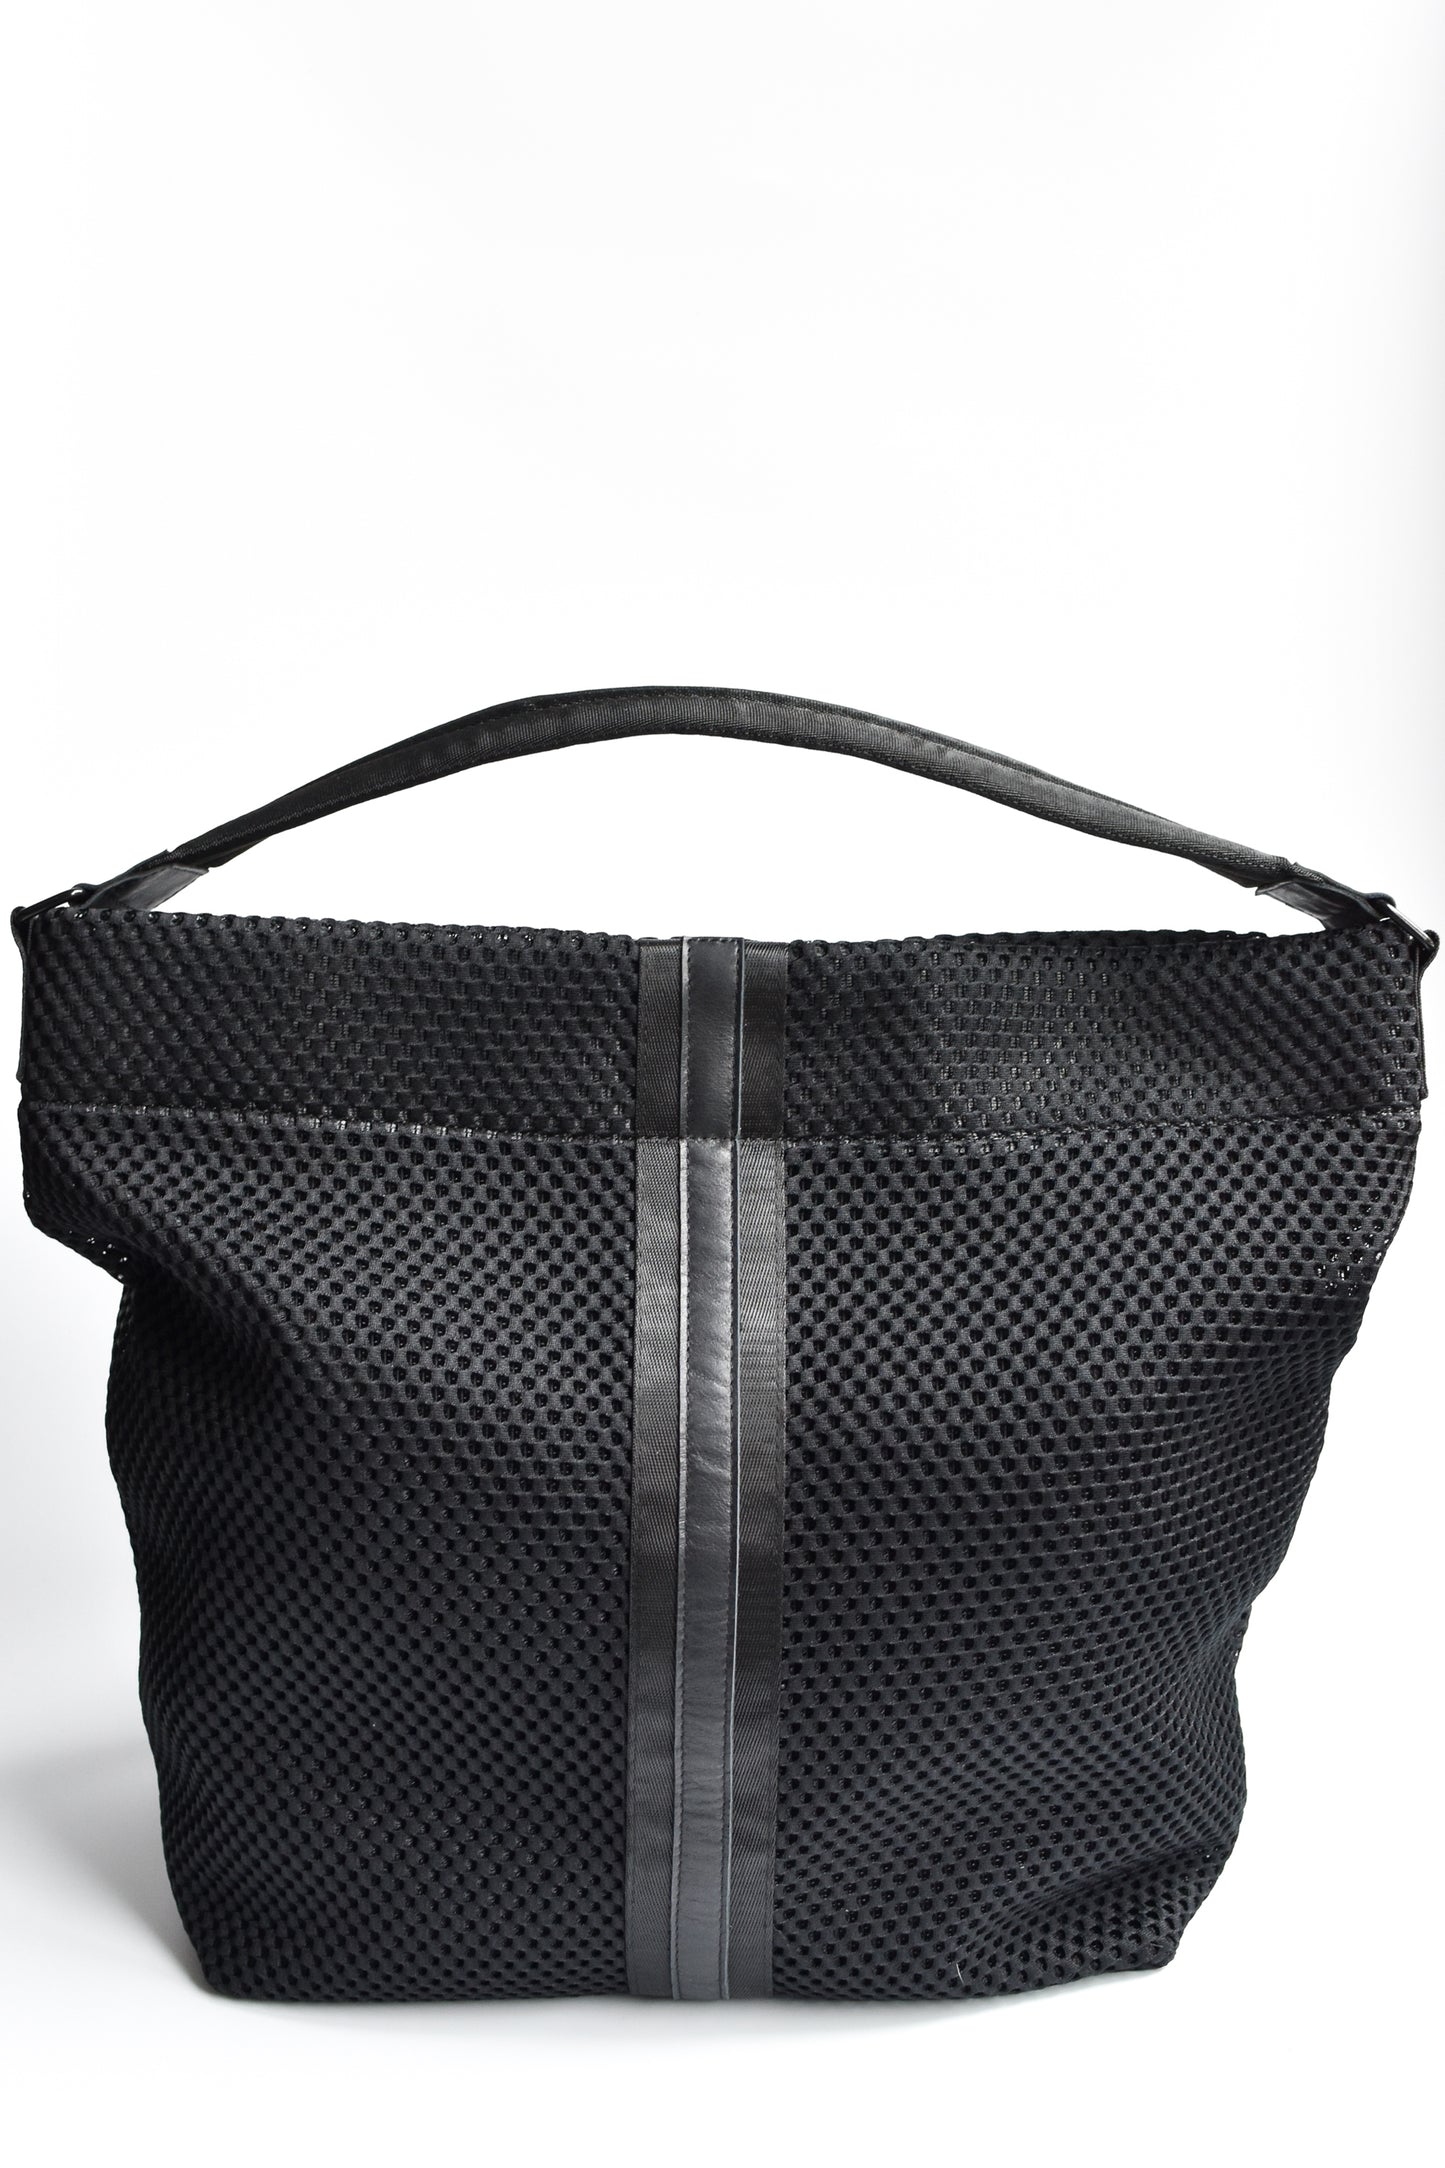 Black sporty mesh tote bag with black leather and webbing details.